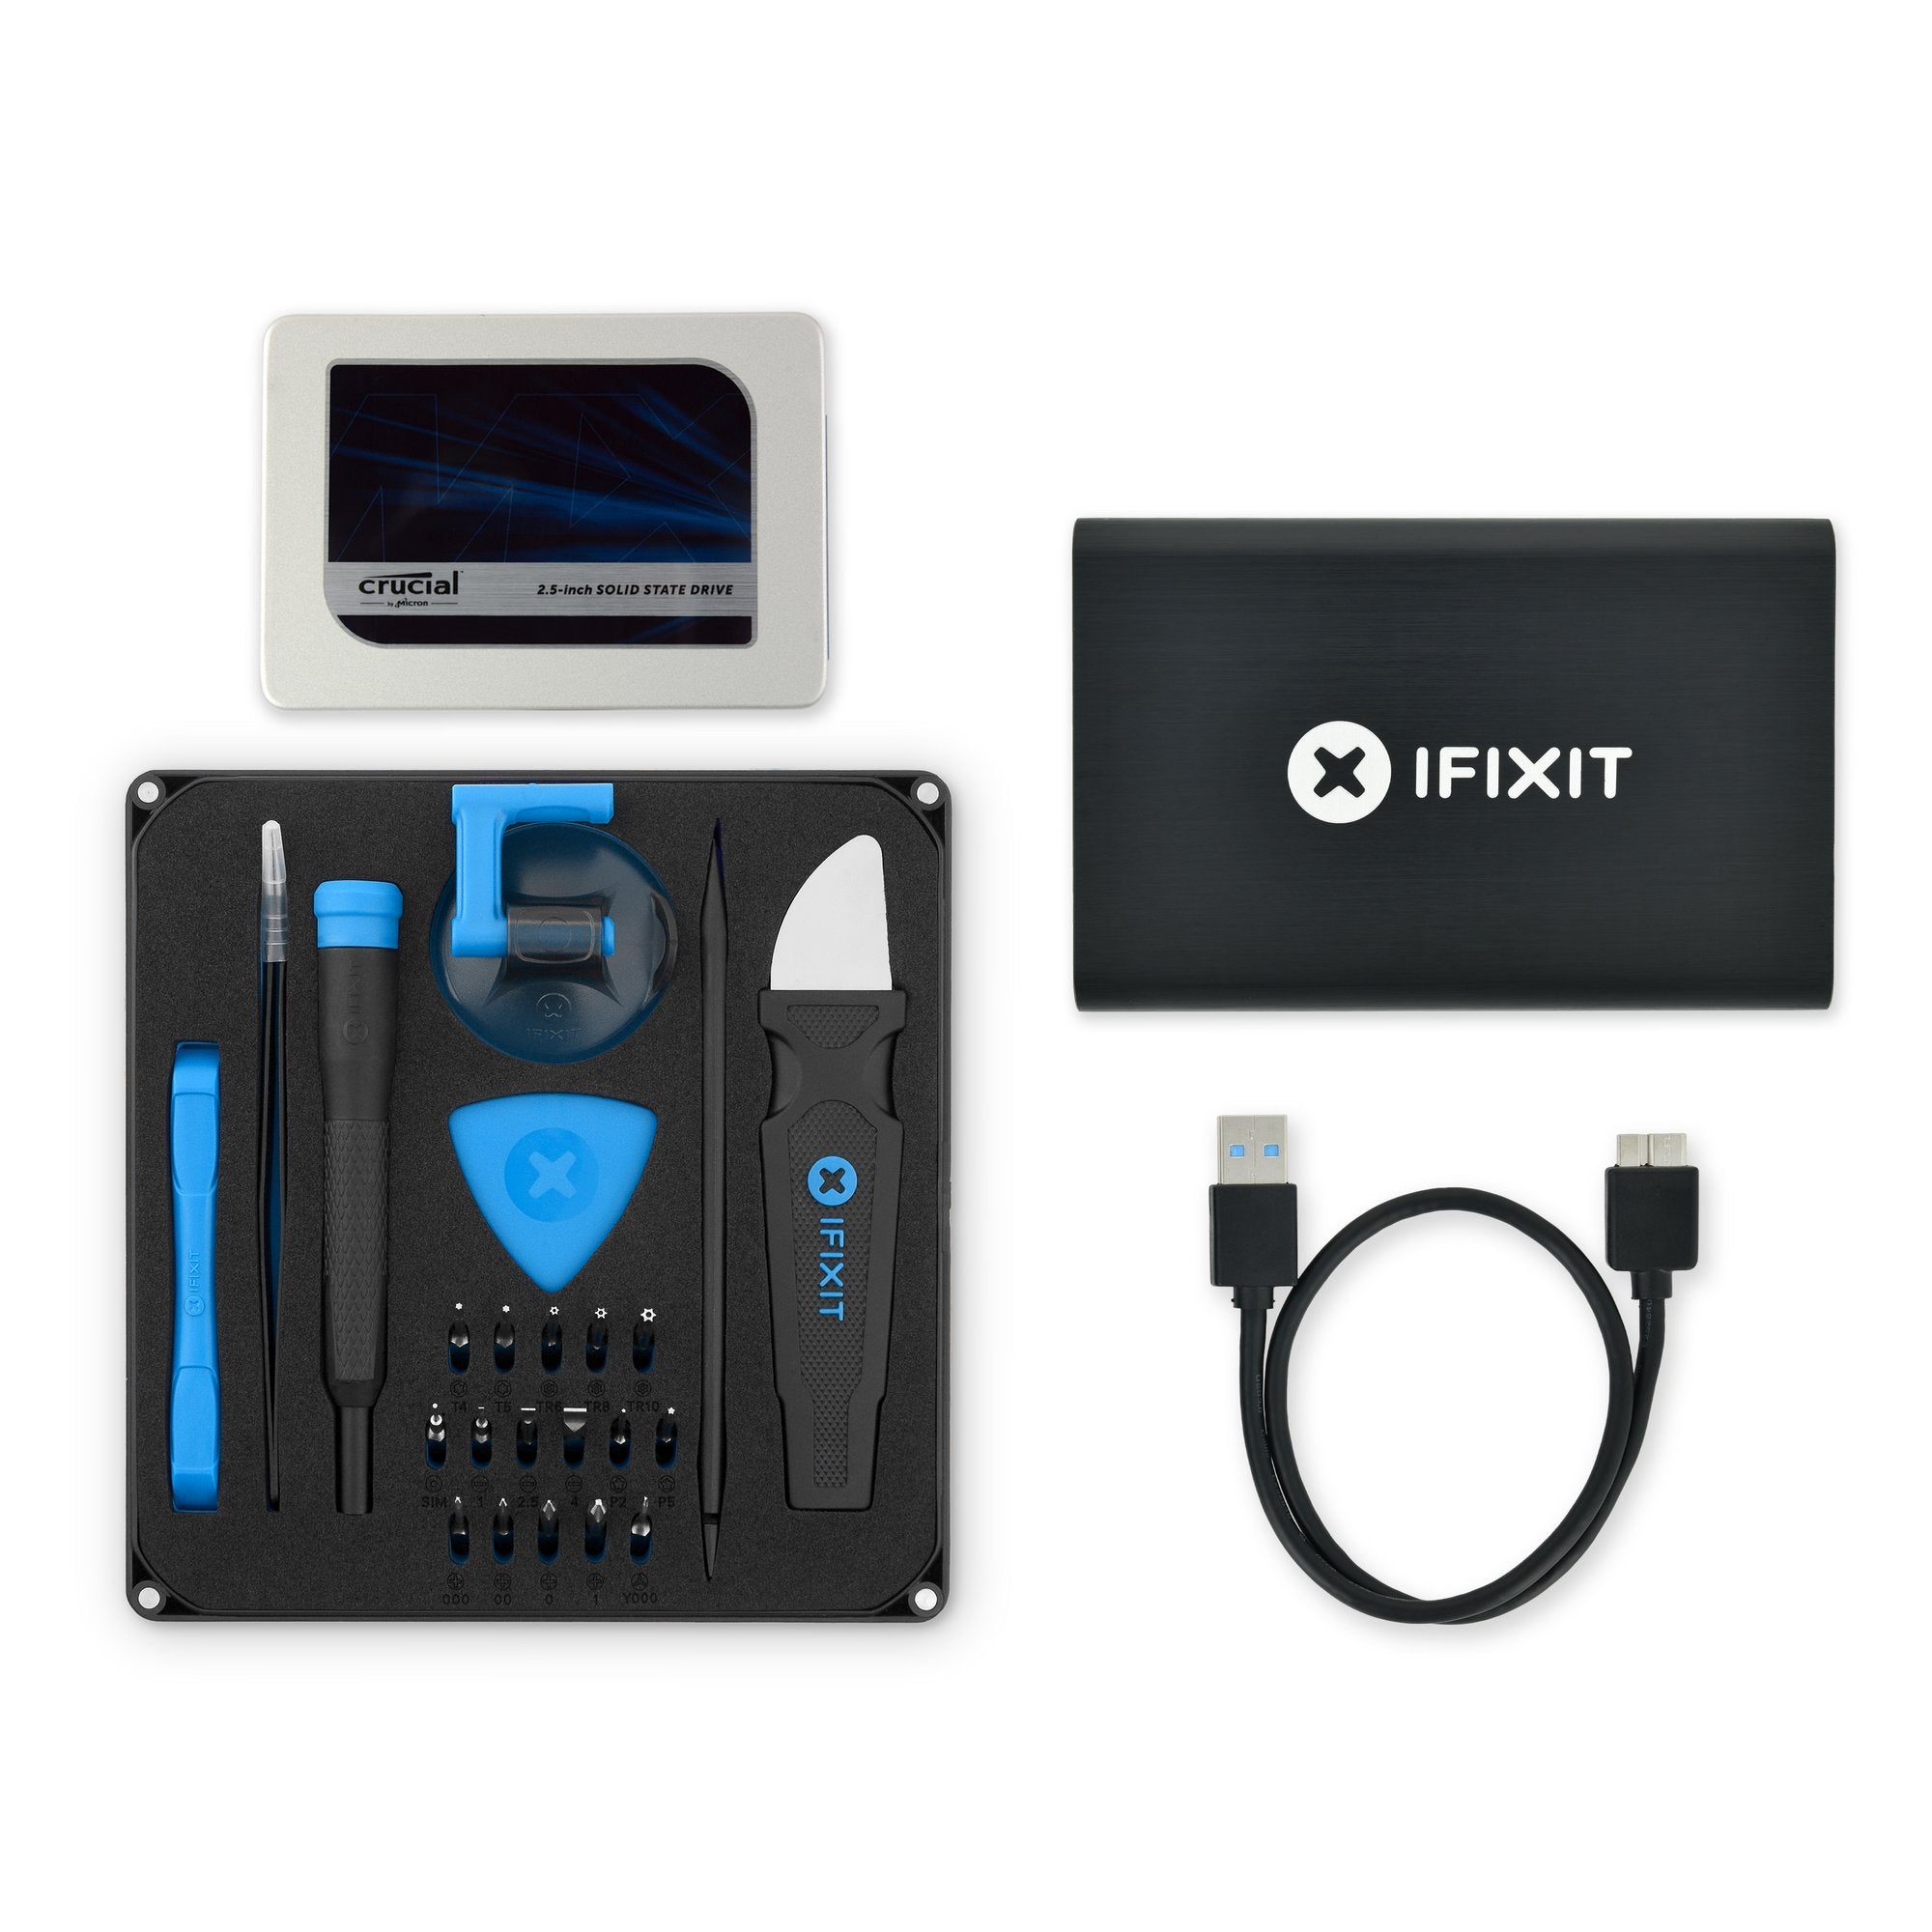 Crucial MX500 500 GB SSD—Your complete iFixit Fix Kit: a Crucial SSD,  iFixit Tools & Instructions. Two-year Quality Guarantee.